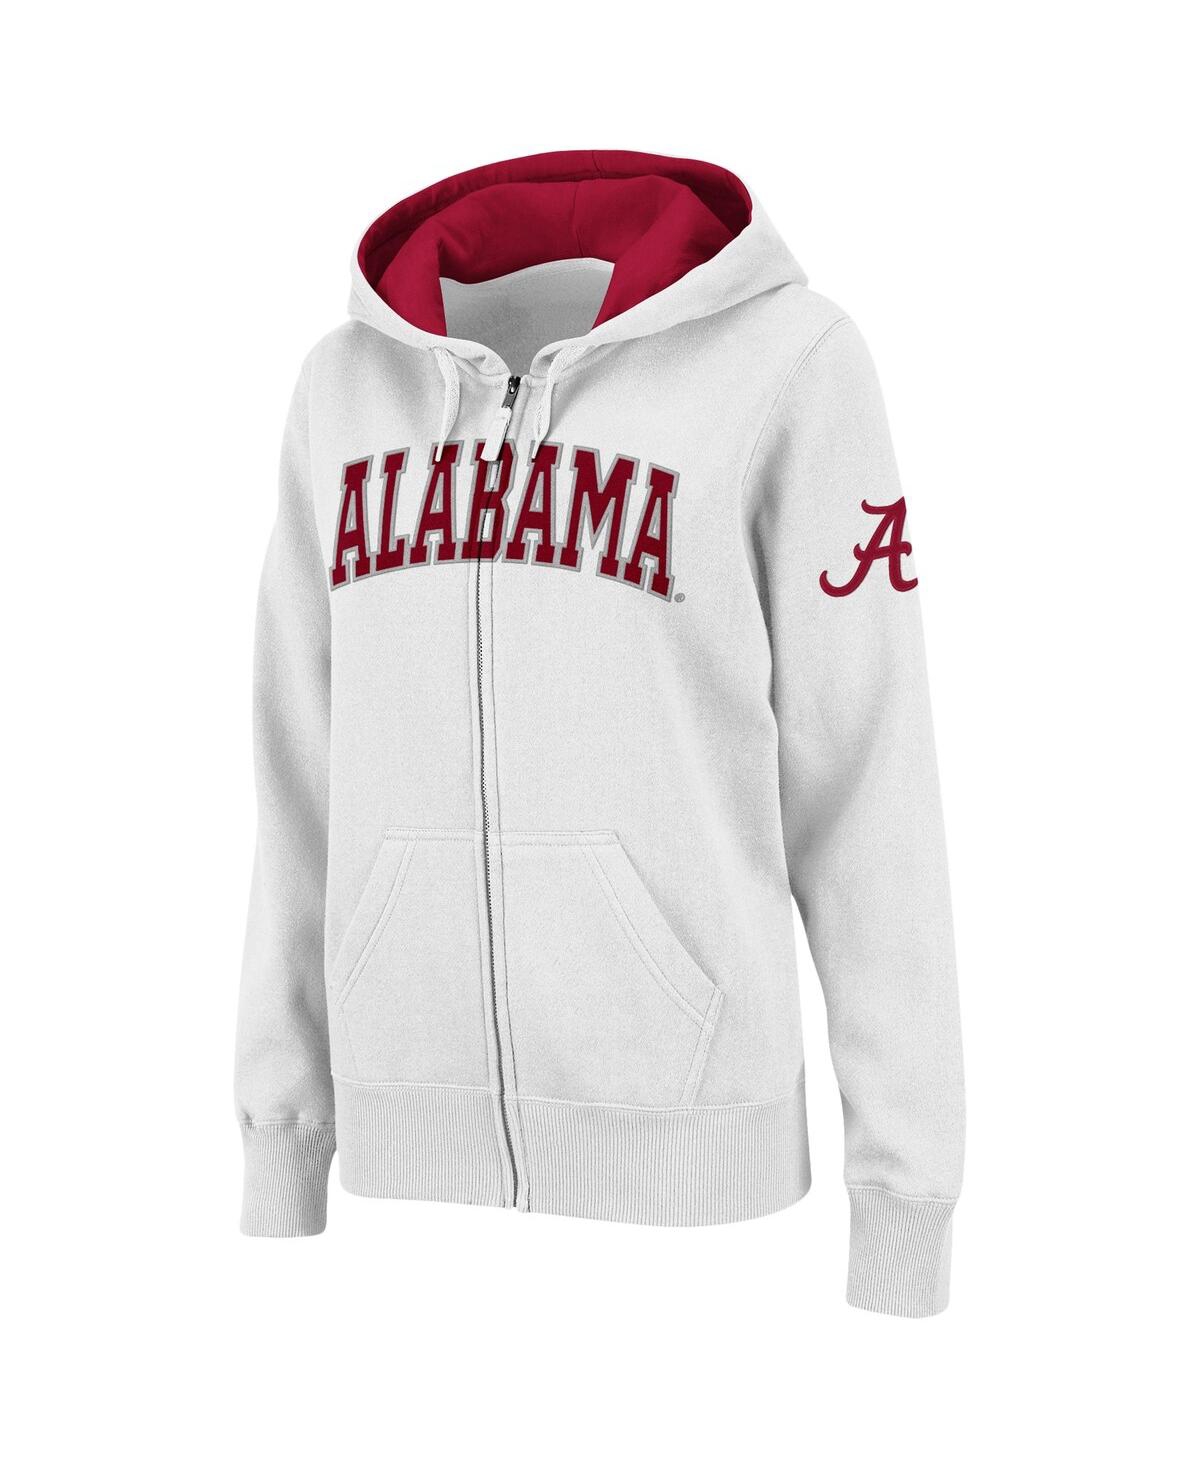 Shop Colosseum Women's  White Alabama Crimson Tide Arched Name Full-zip Hoodie